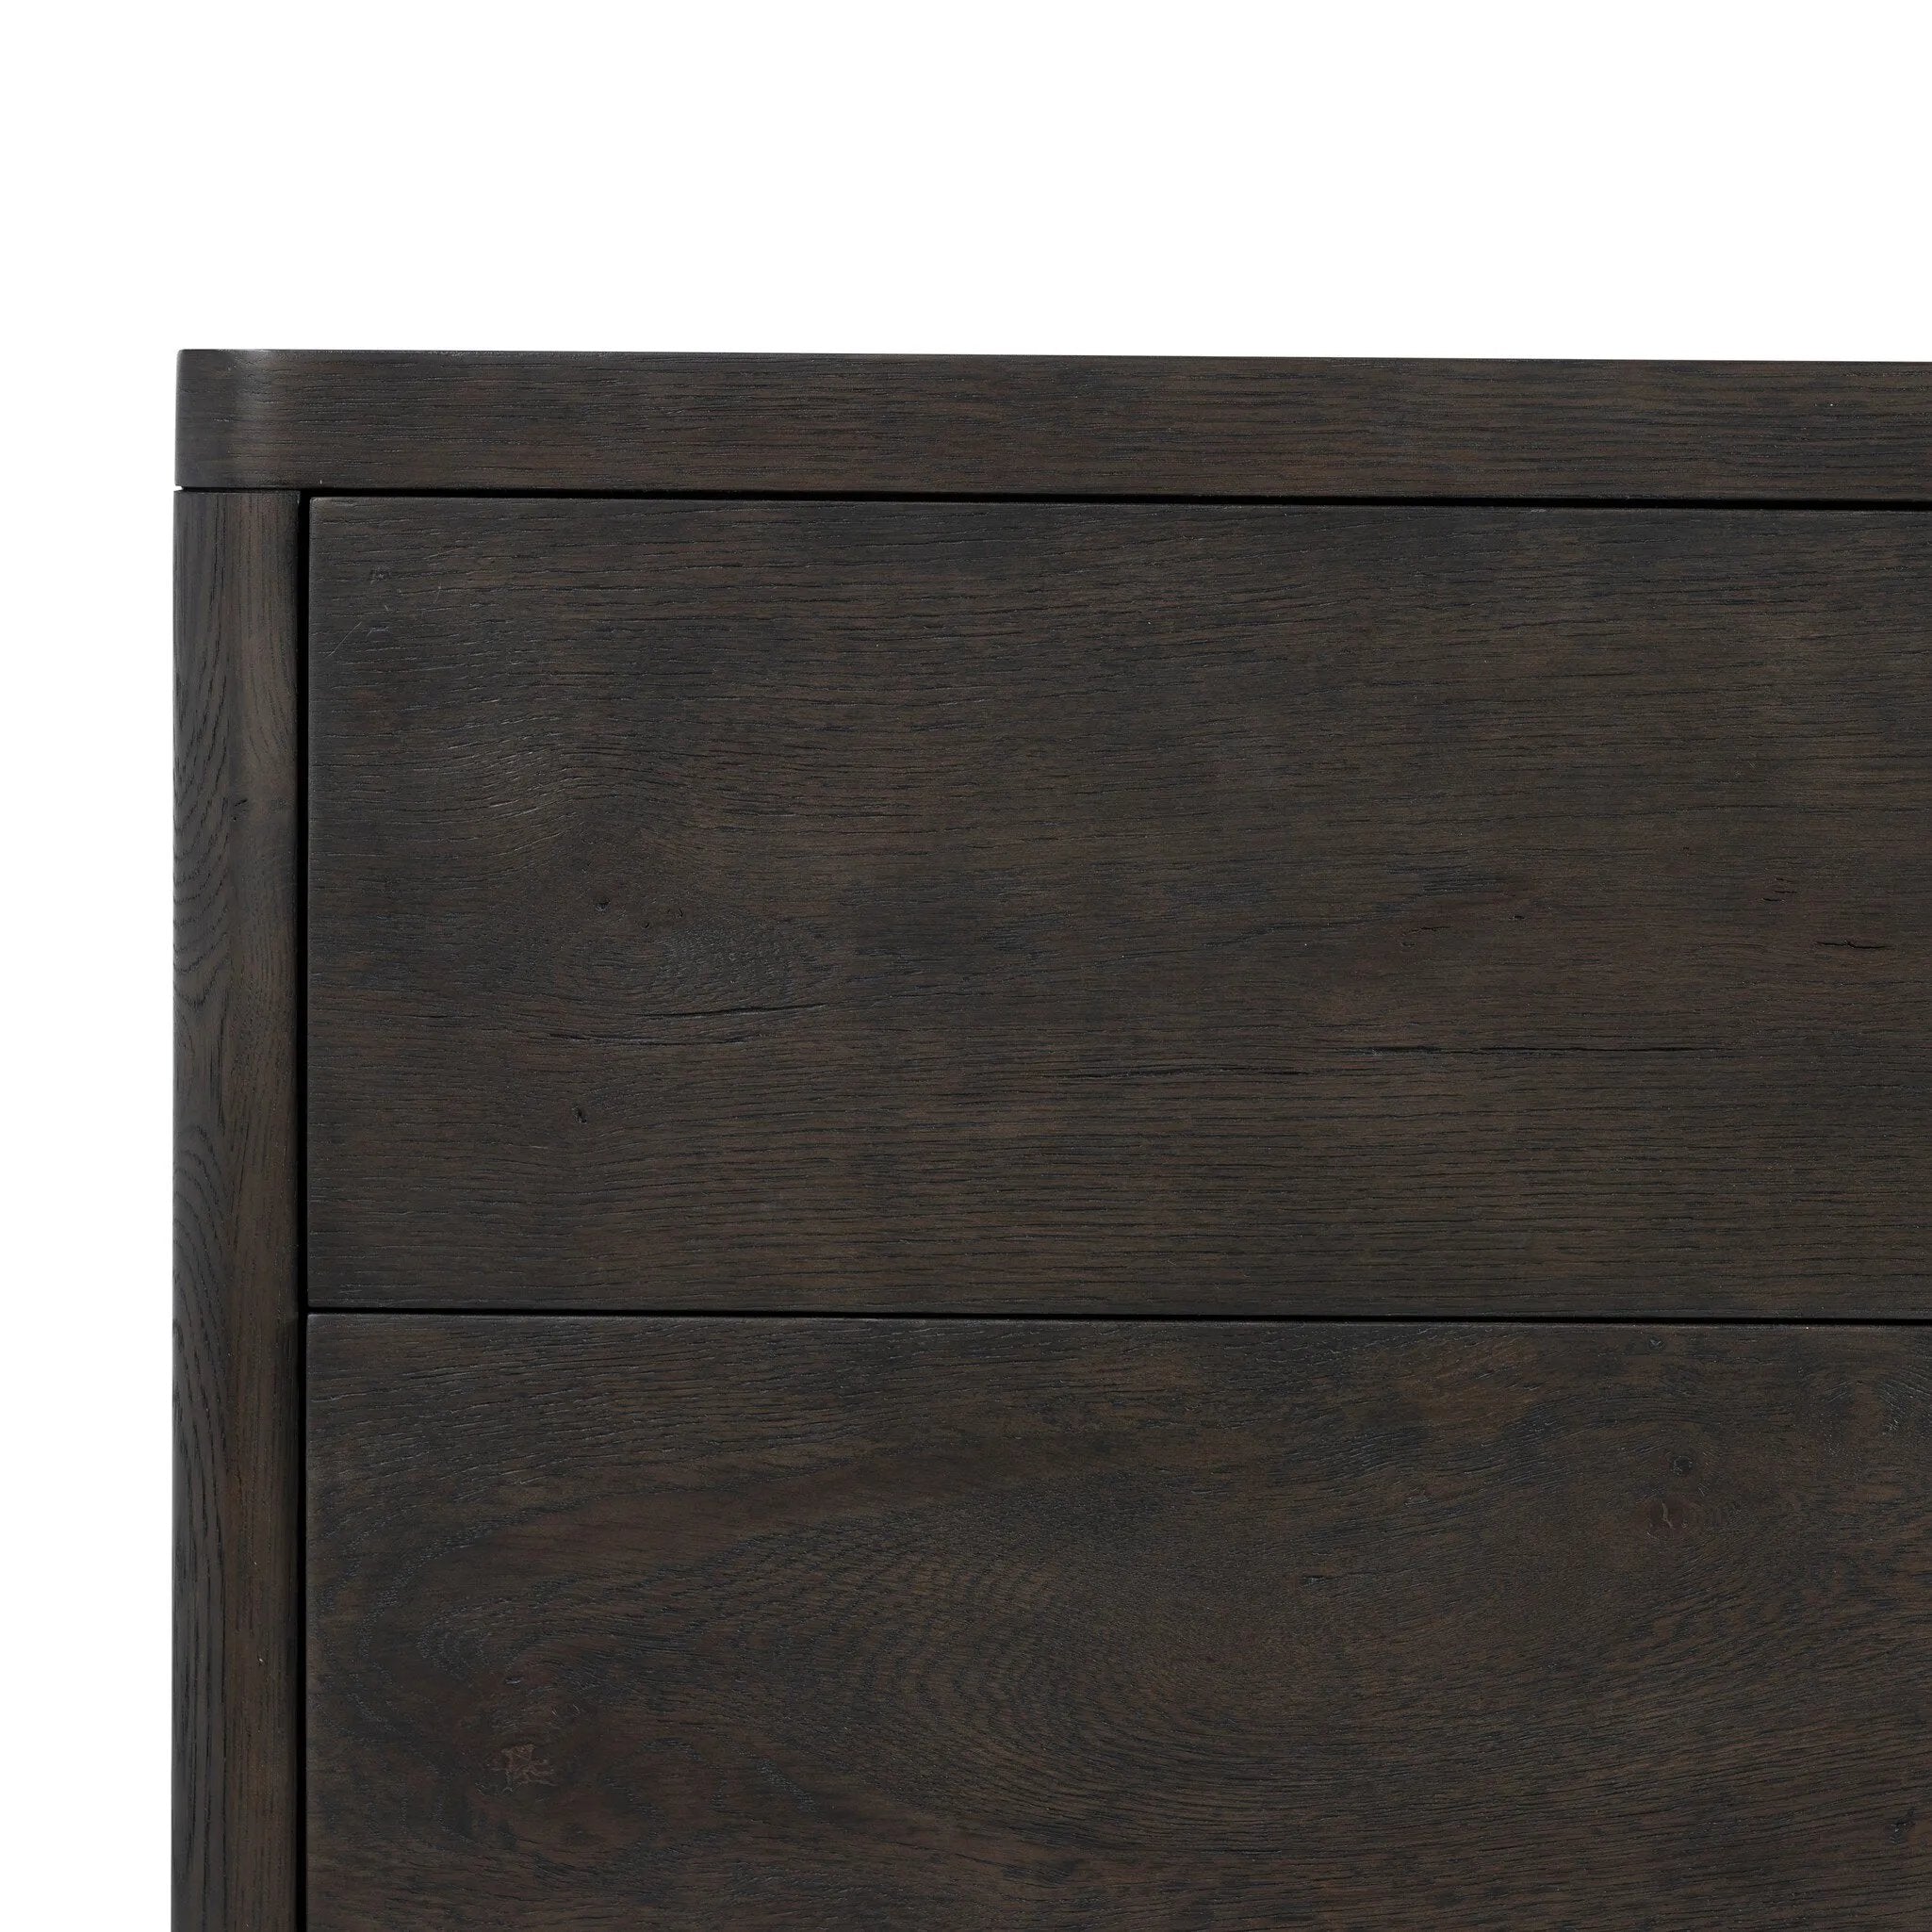 Topped with a thick plank of solid oak, this extra-wide nightstand blends modern lines and warm character with two roomy drawers, slightly curved corners, and solid square legs. Seamless drawer fronts have a push-latch mechanism. Made from solid oak and veneer in a smoky black finish.Collection: Bolto Amethyst Home provides interior design, new home construction design consulting, vintage area rugs, and lighting in the Houston metro area.